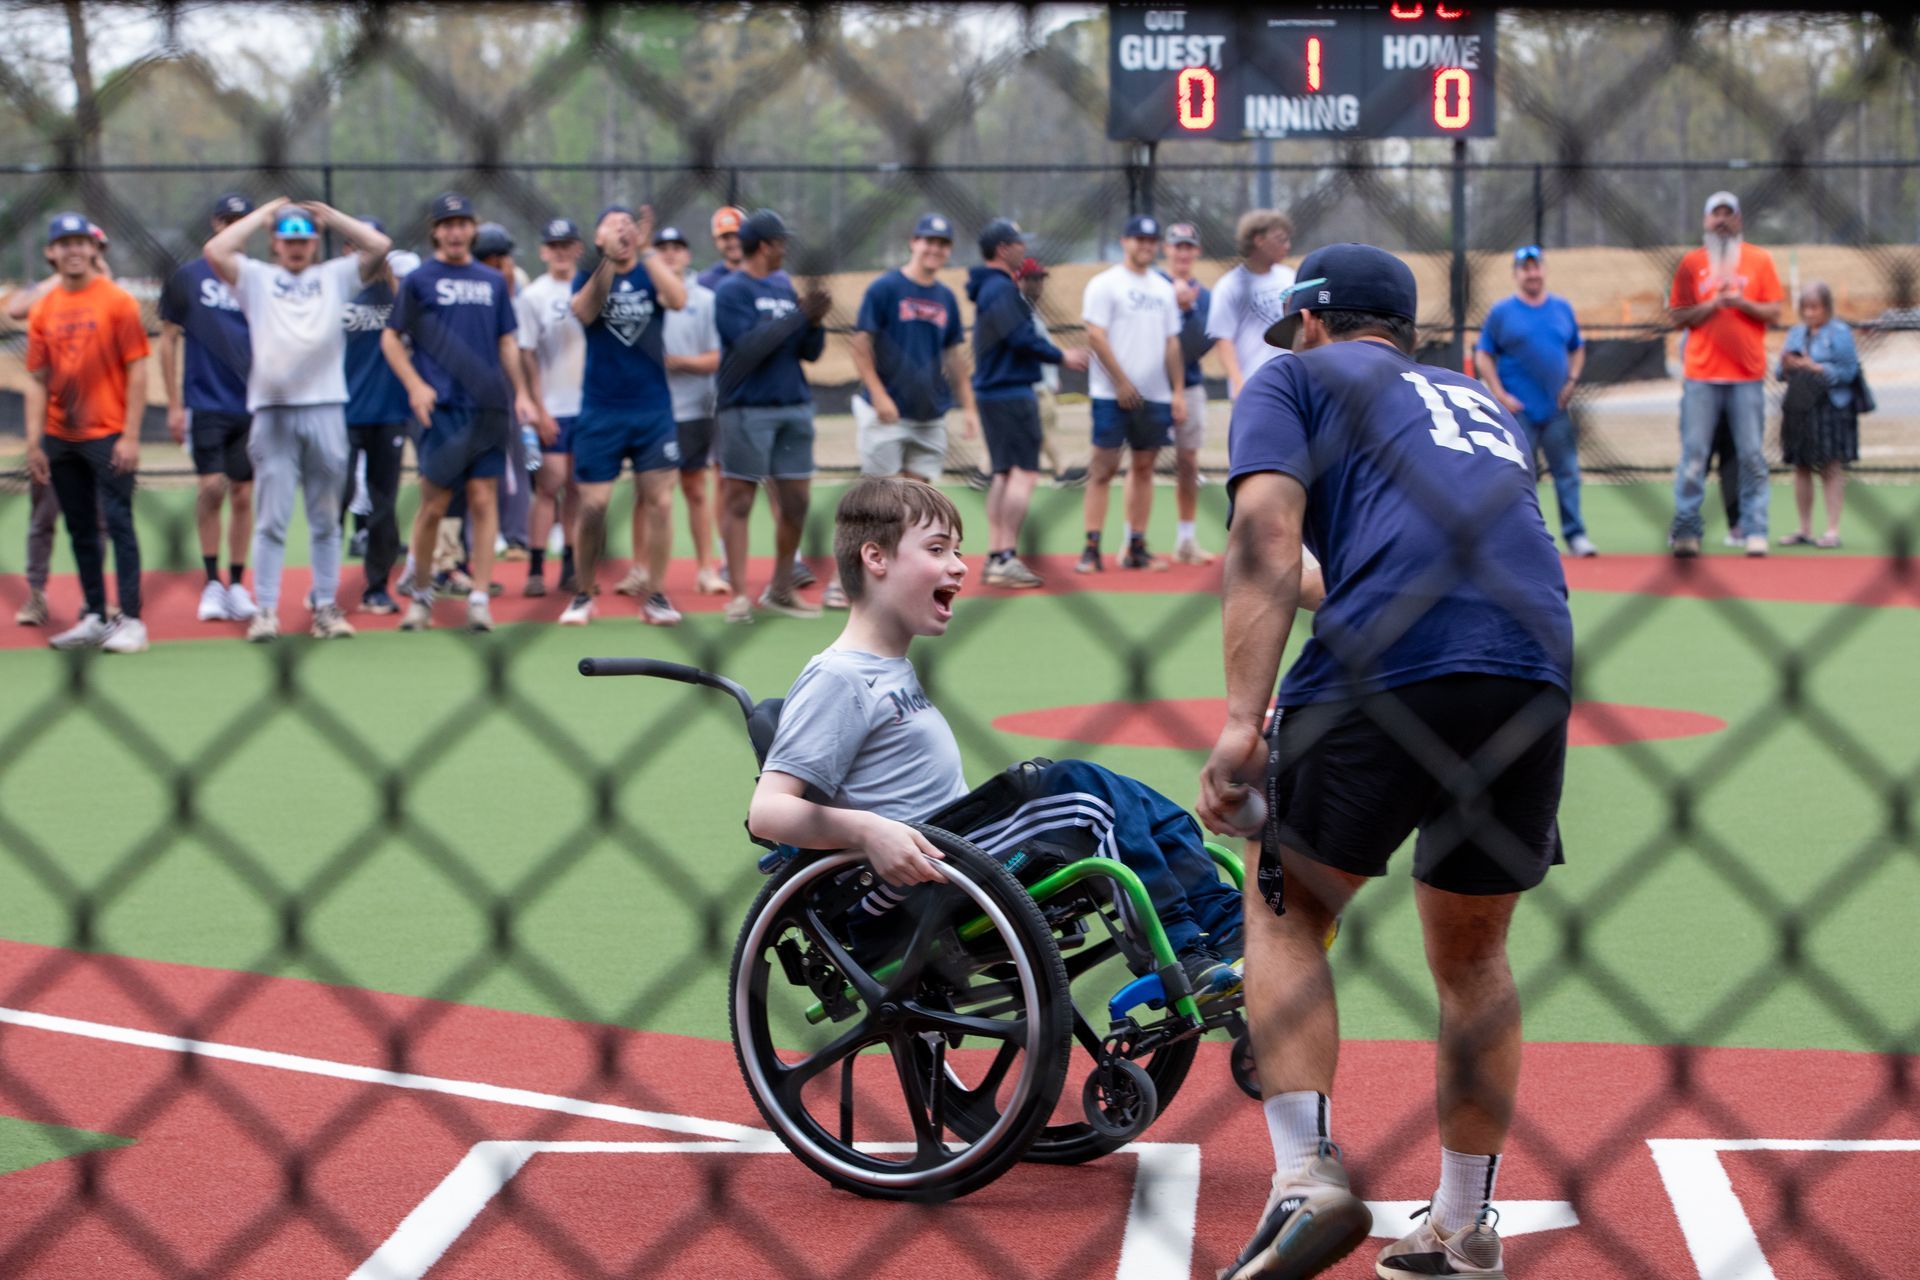 A man in a wheelchair is playing baseball with a group of people behind a chain link fence.